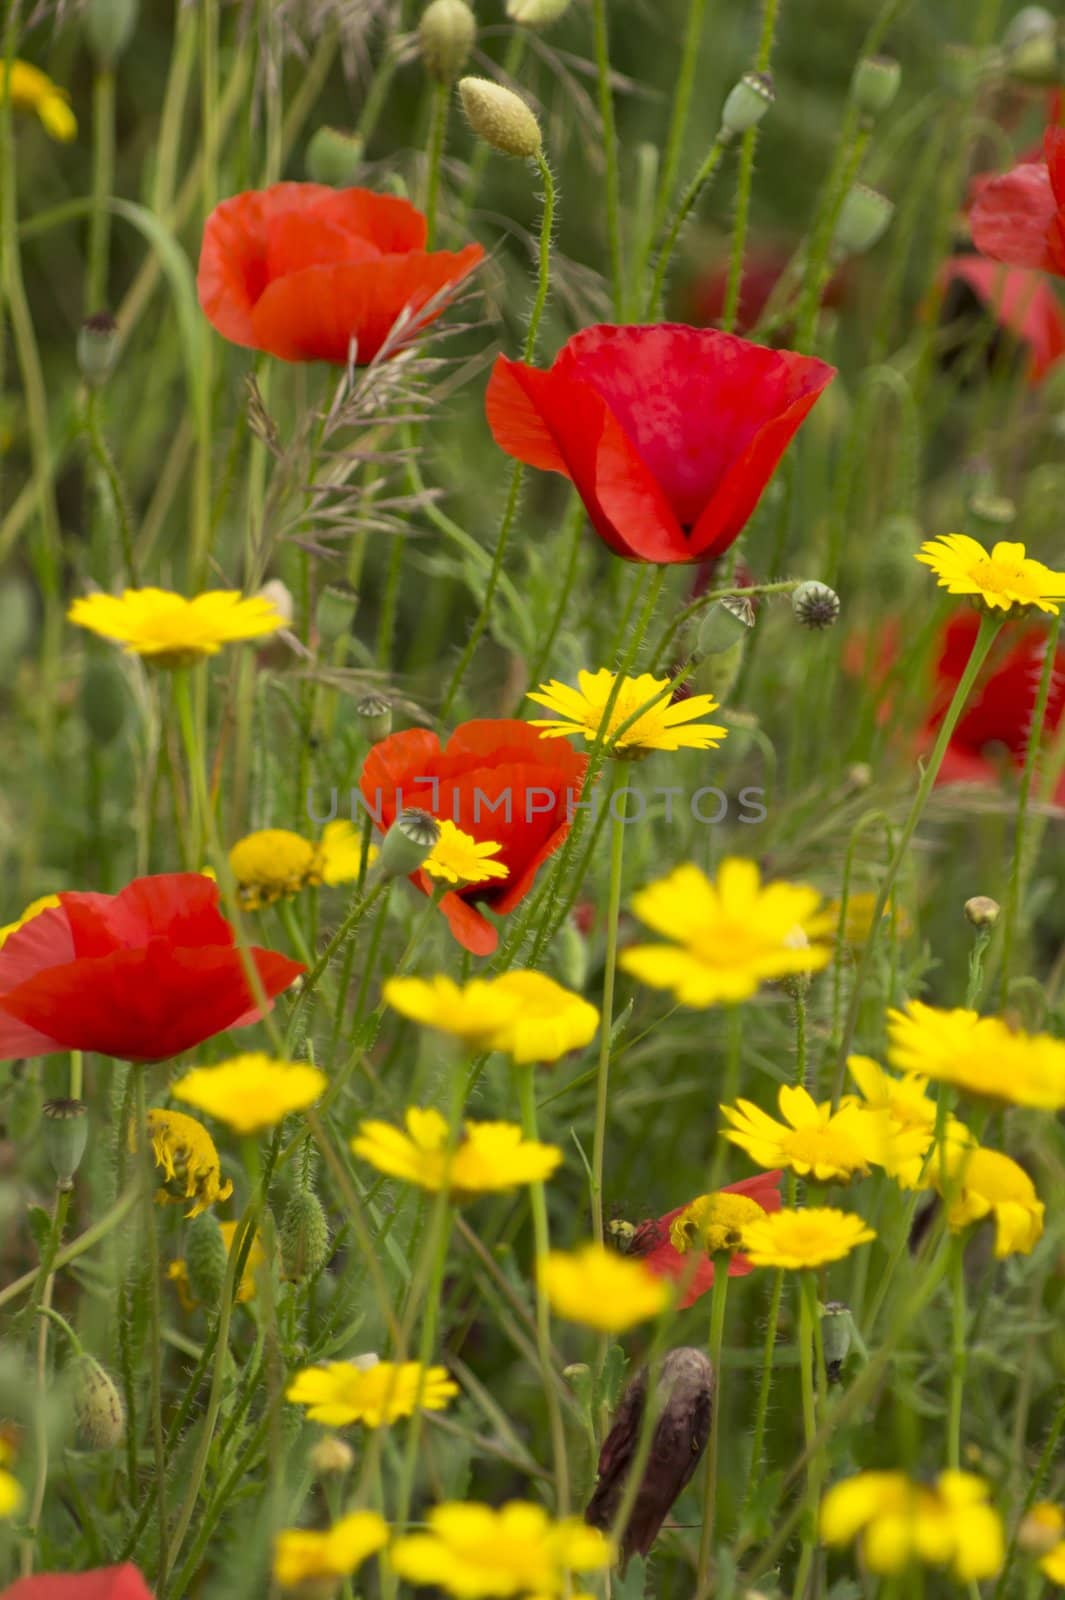 Yellow flowers and red poppies in a field.